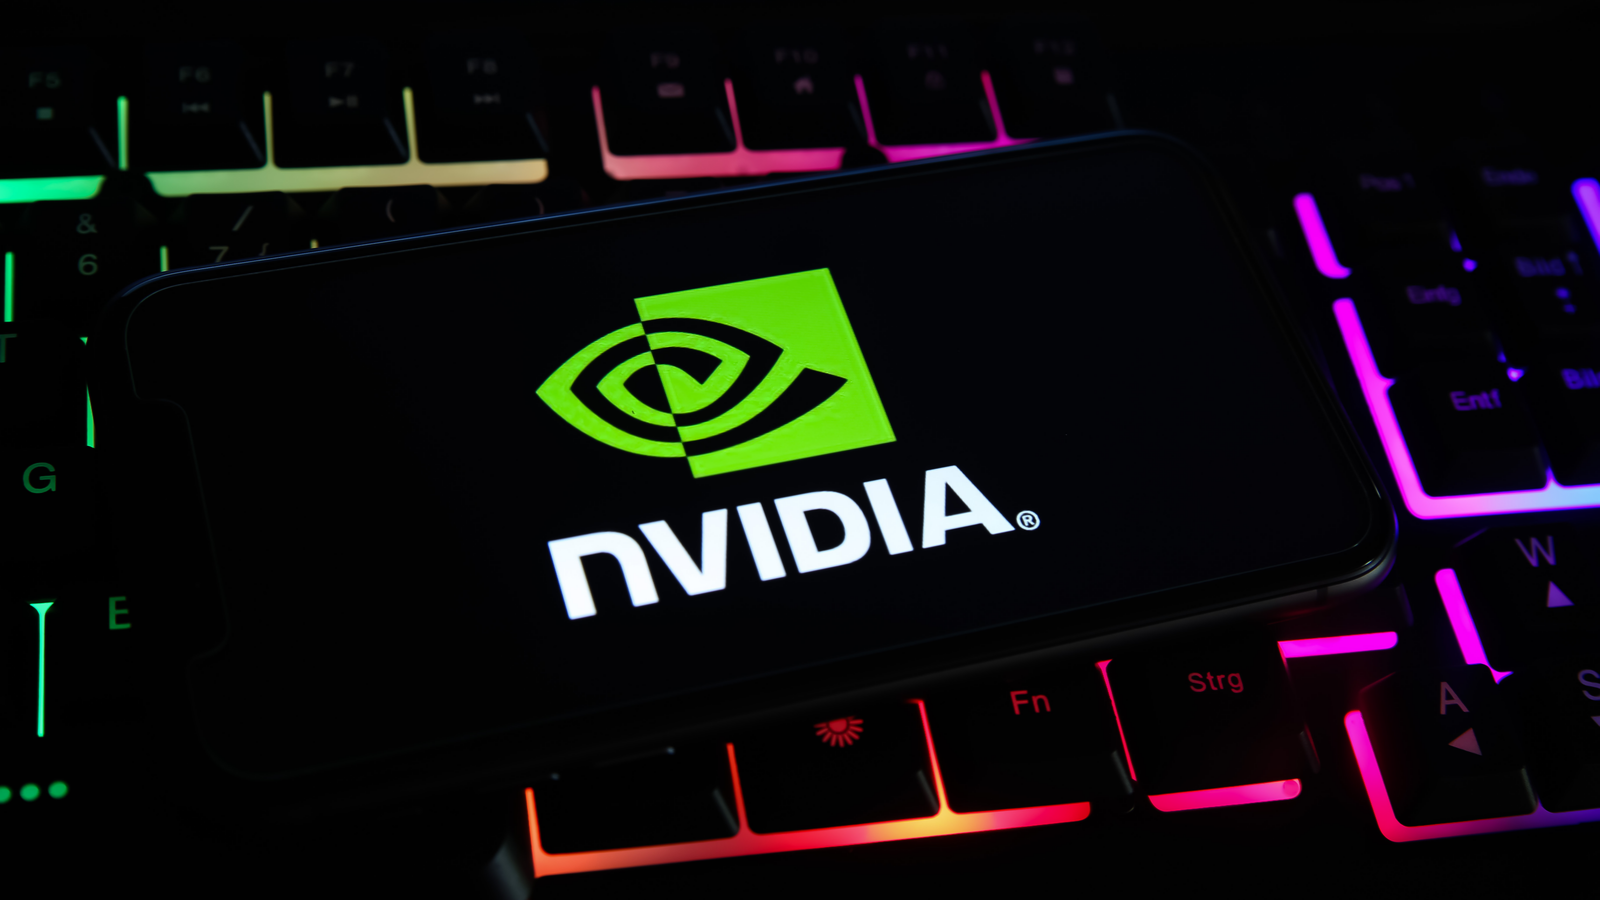 NVDA Stock: Is Nvidia Still a Buy If It Flops on Earnings Expectations?